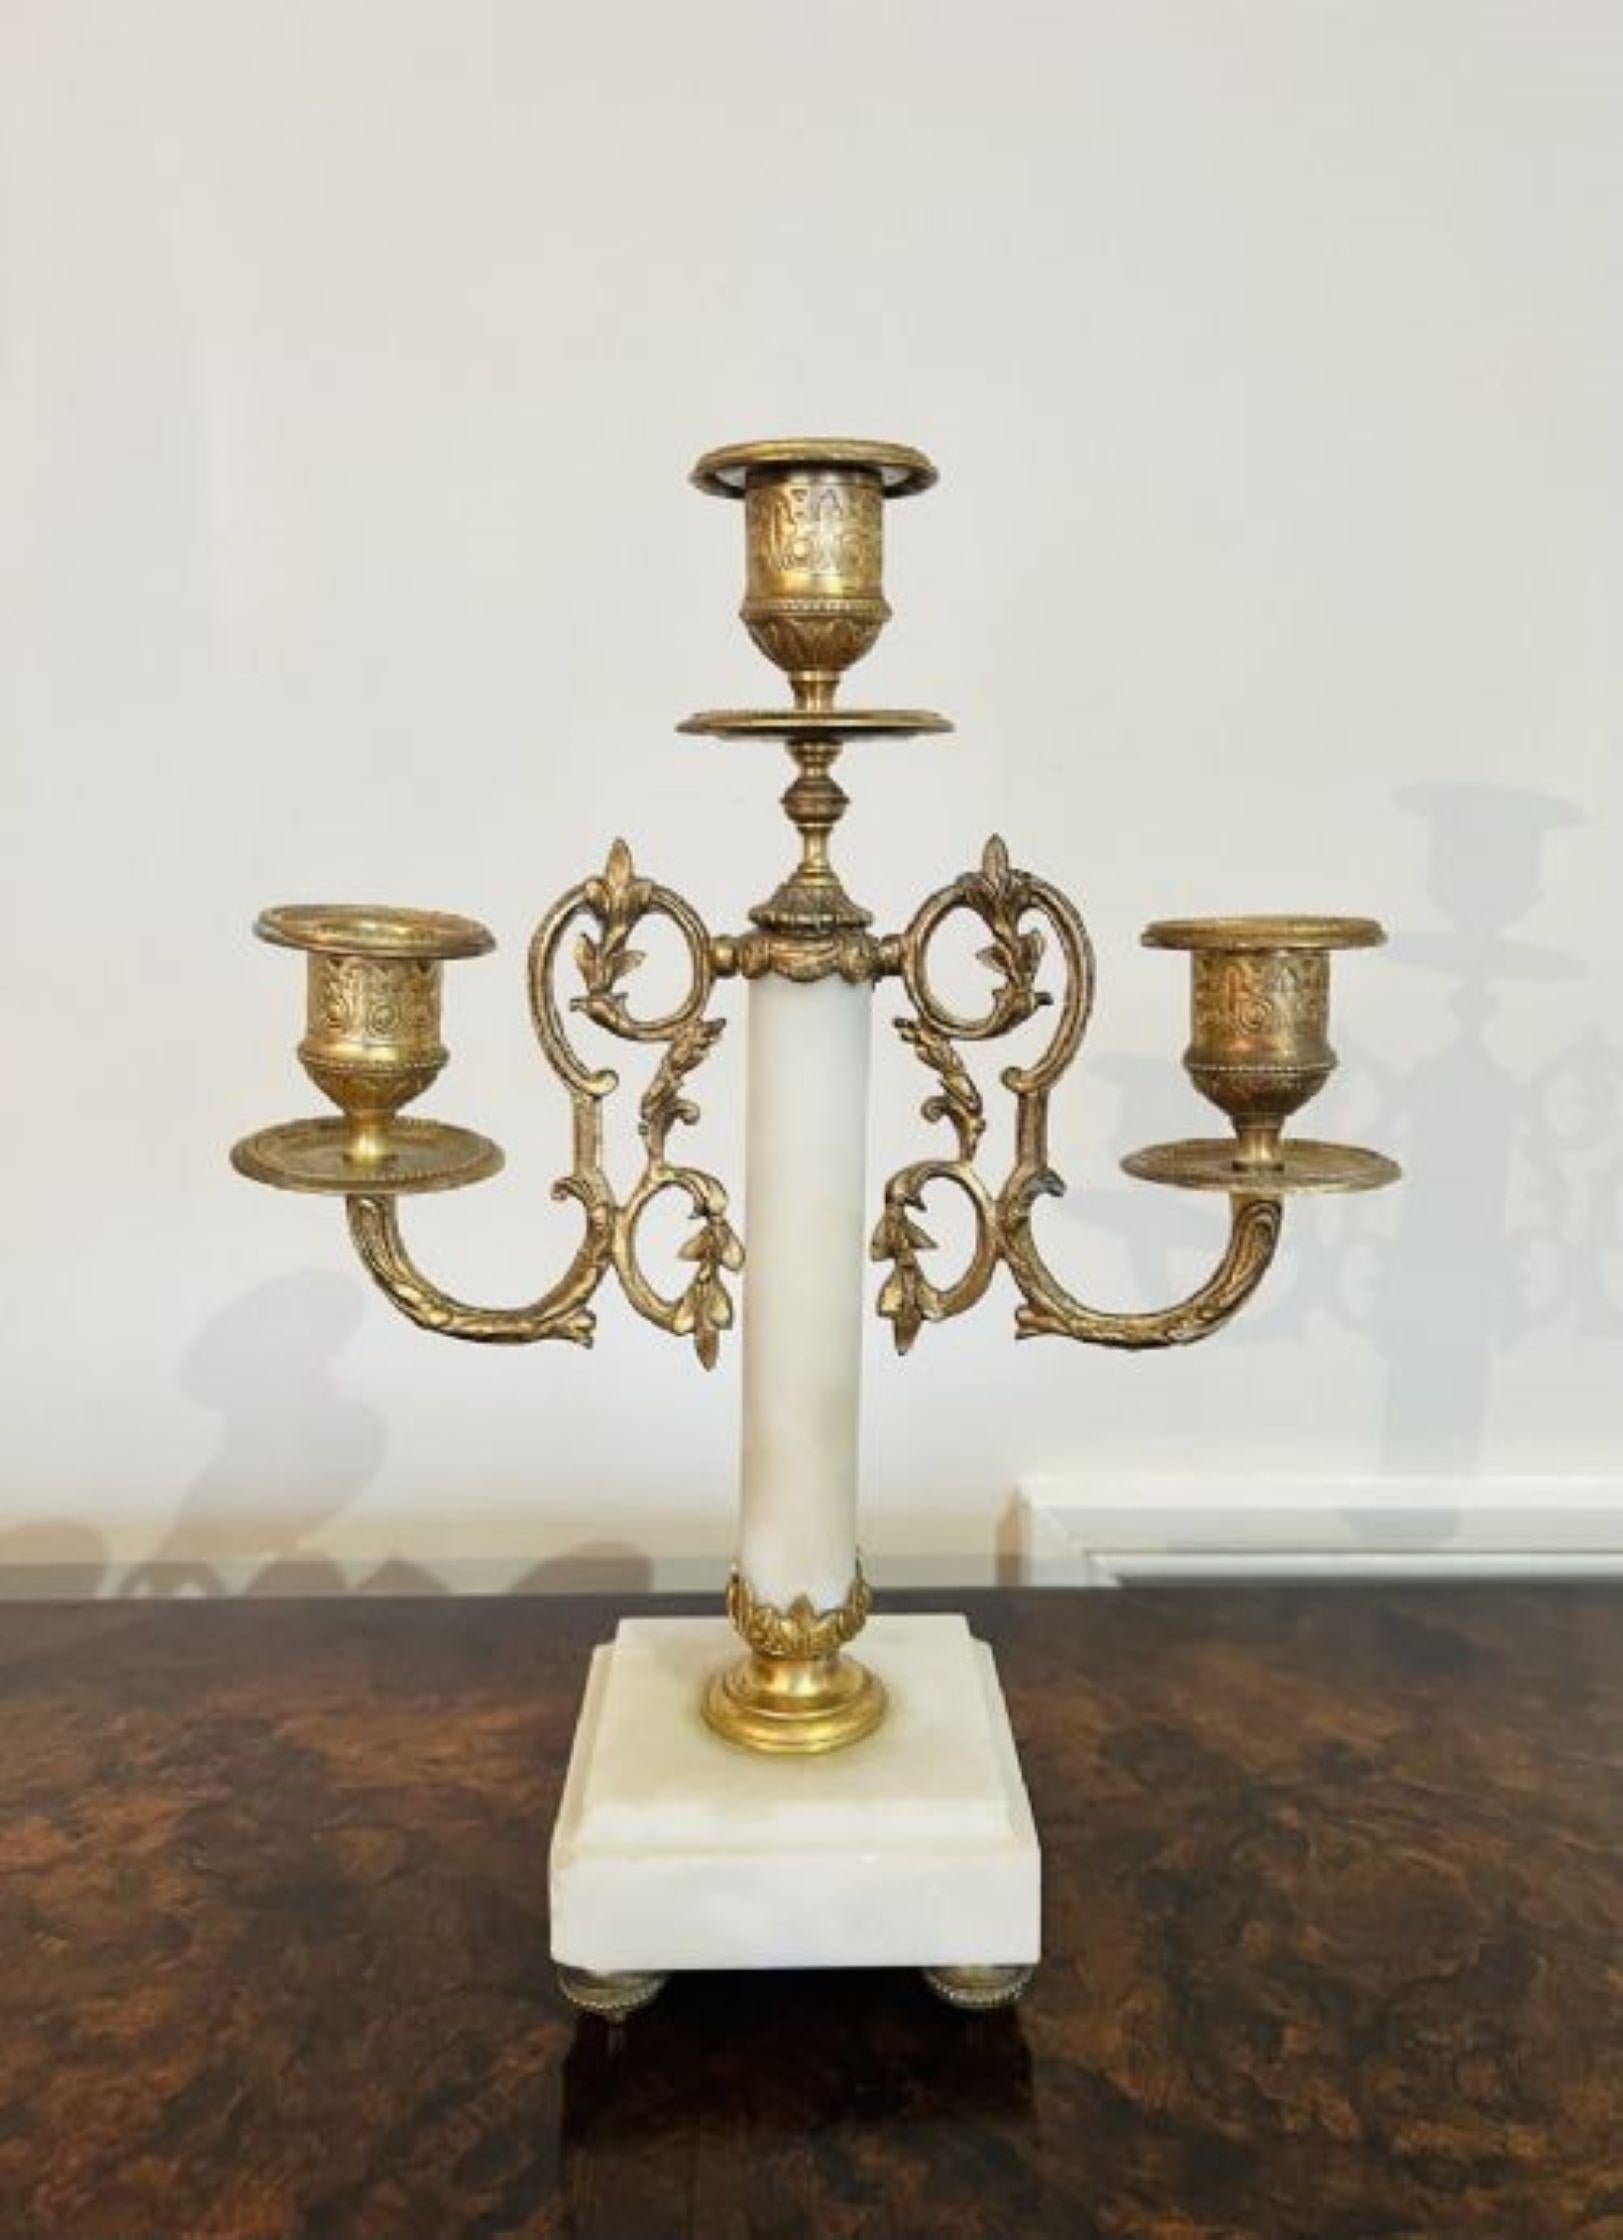 Quality antique Victorian clock garniture with a pair of candelabras standing on onyx bases with ornate brass mounts having a cylinder clock with a 8 day French movement striking the hour and half hour on a bell marked Rouen
Please note all of our